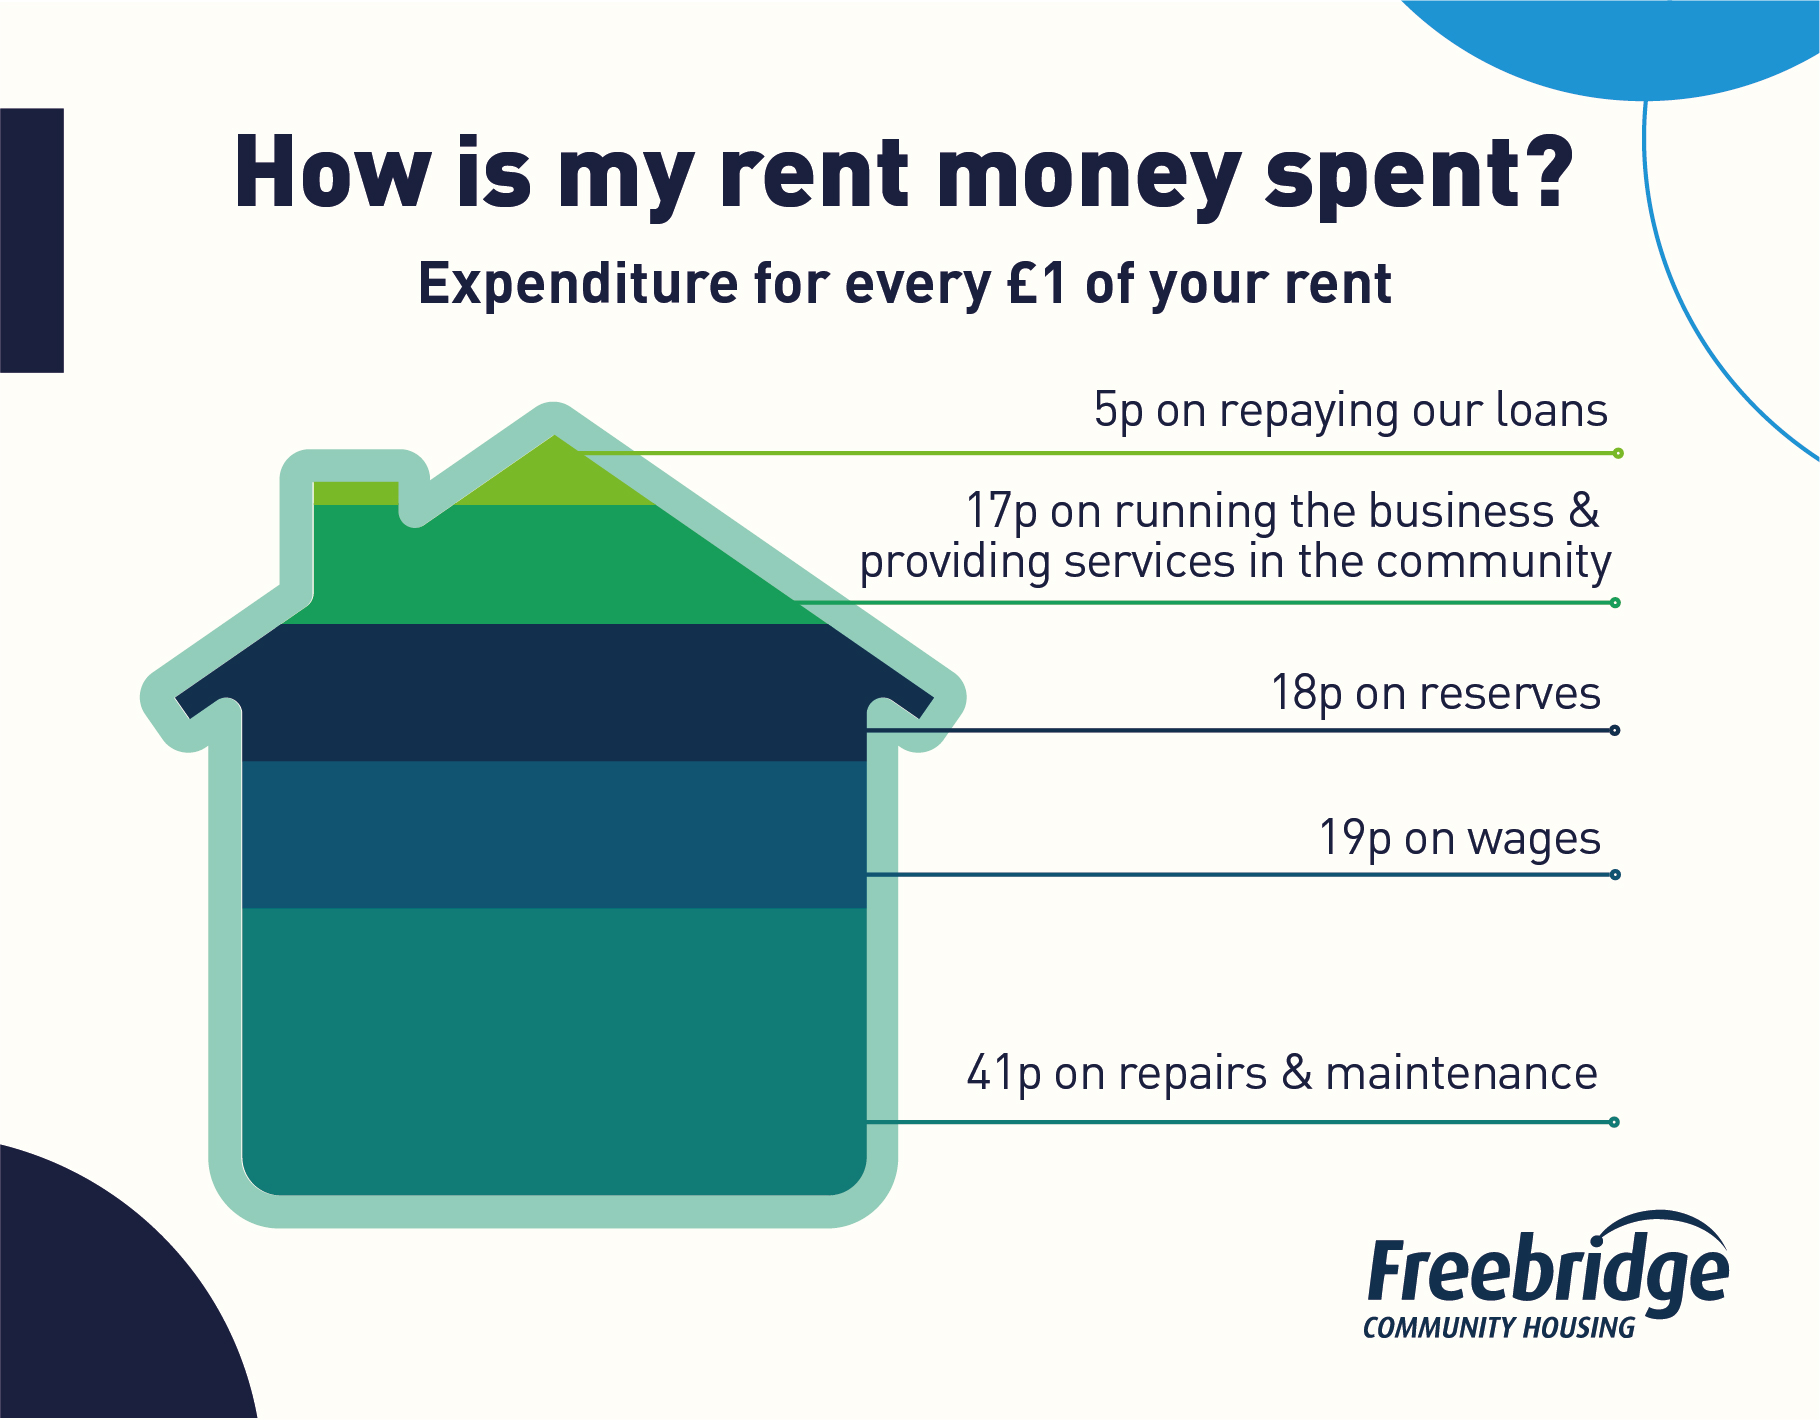 How is my rent money spent infographic showing where every £1 of rent money goes